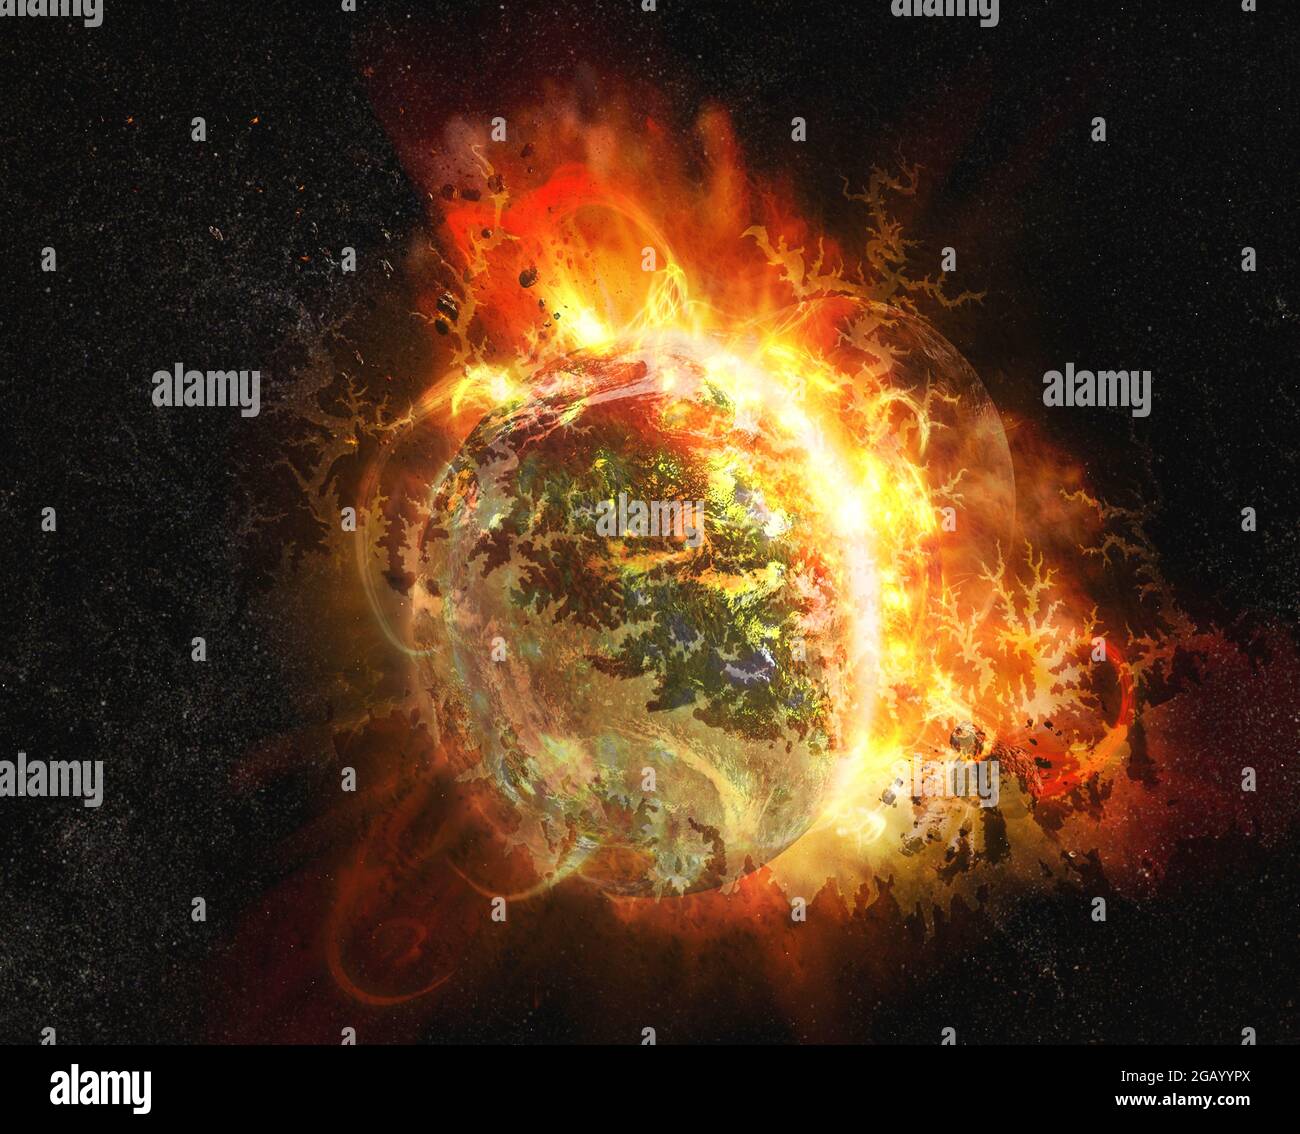 Catastrophe of the planet, explosion and break into pieces in a fireball. Elements of this image furnished by NASA. Stock Photo